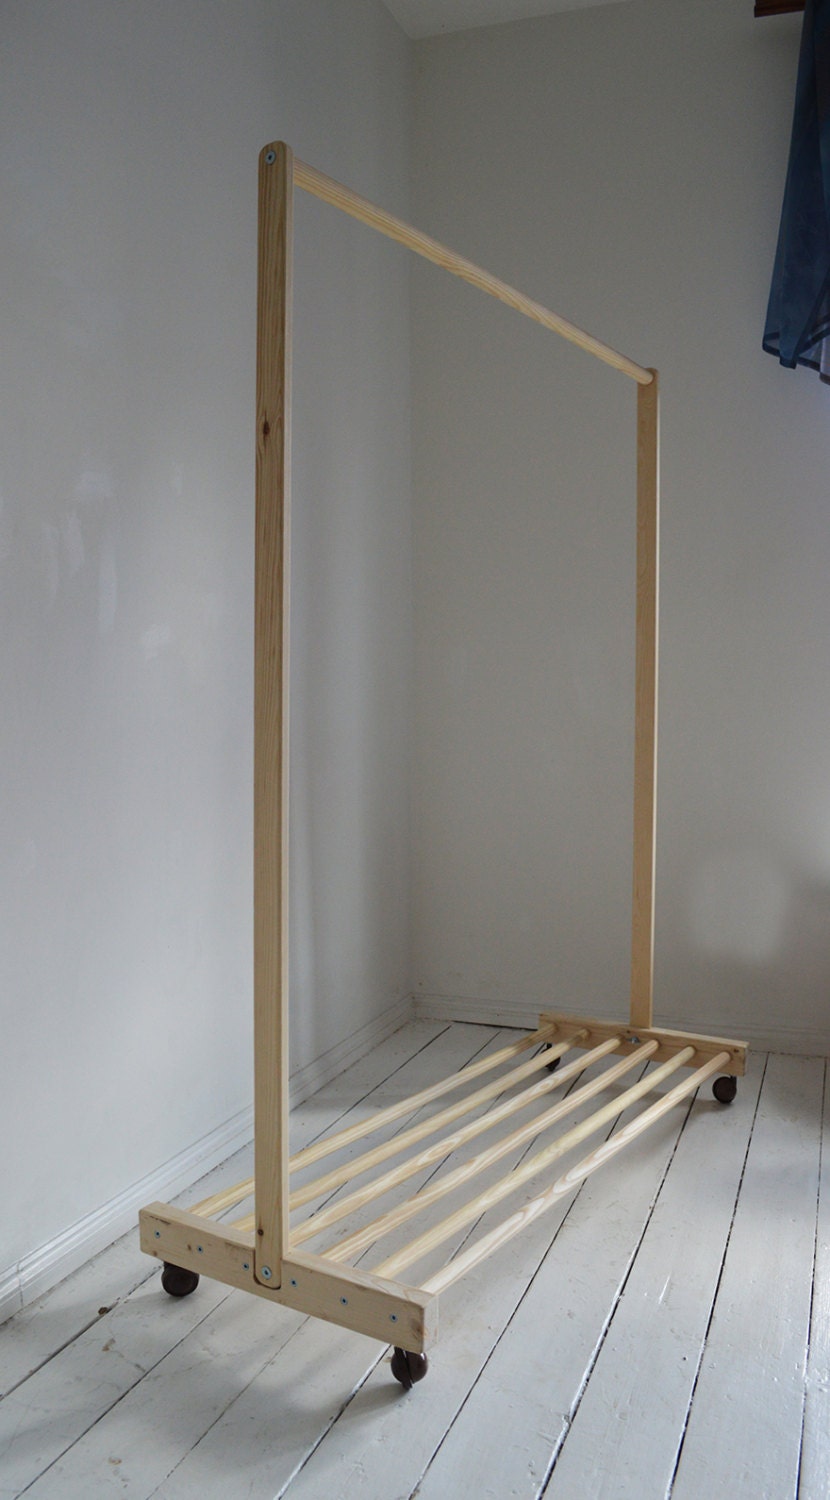 Handmade Natural Pine Wood Clothes Rail with Shelf and